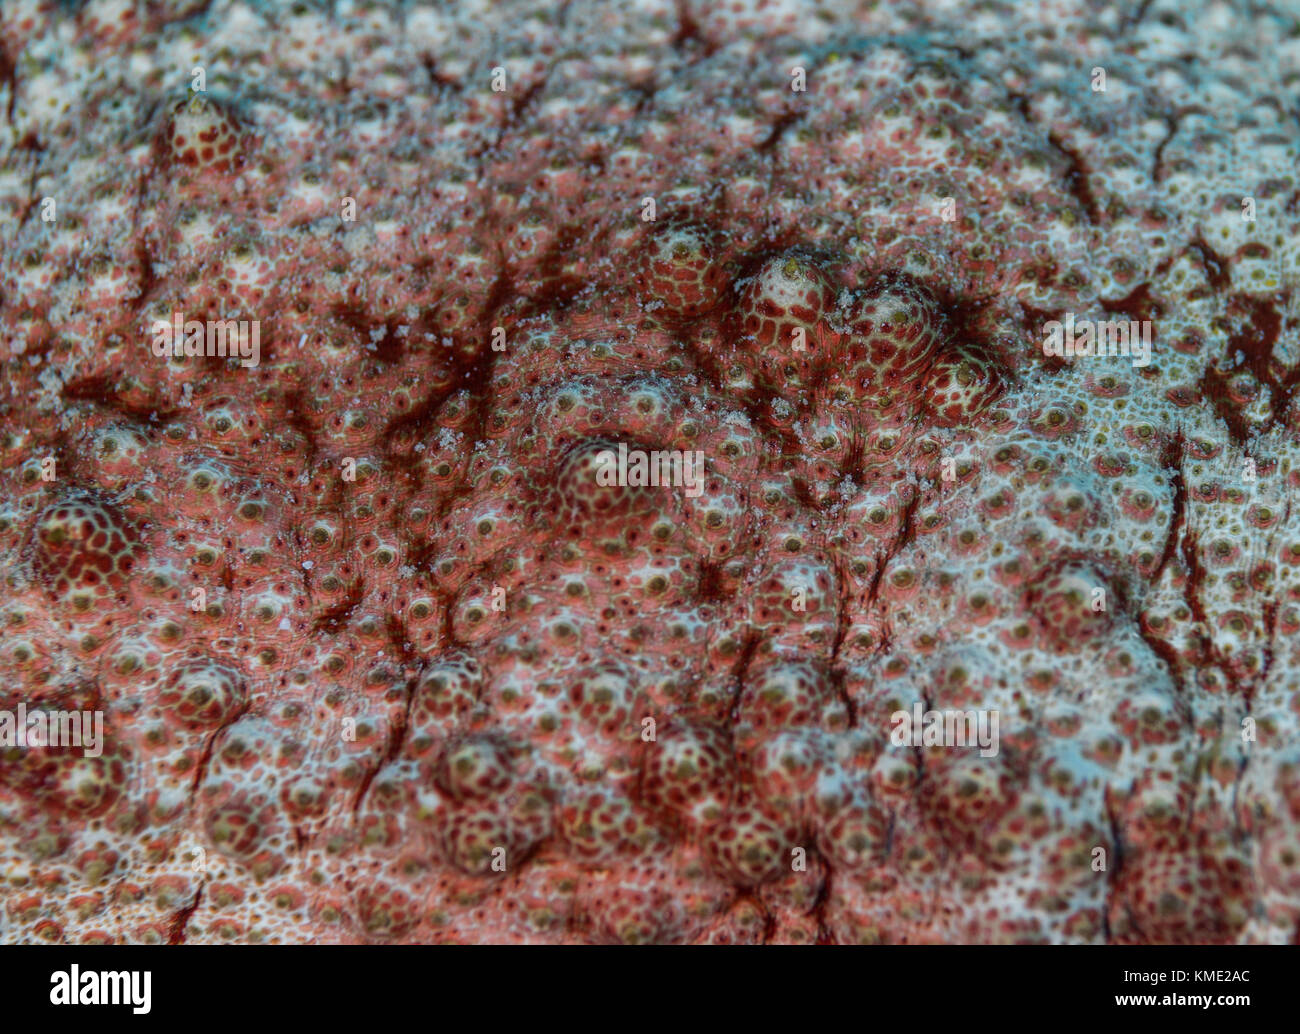 Abstract of the surface of a sea cucumber Stock Photo